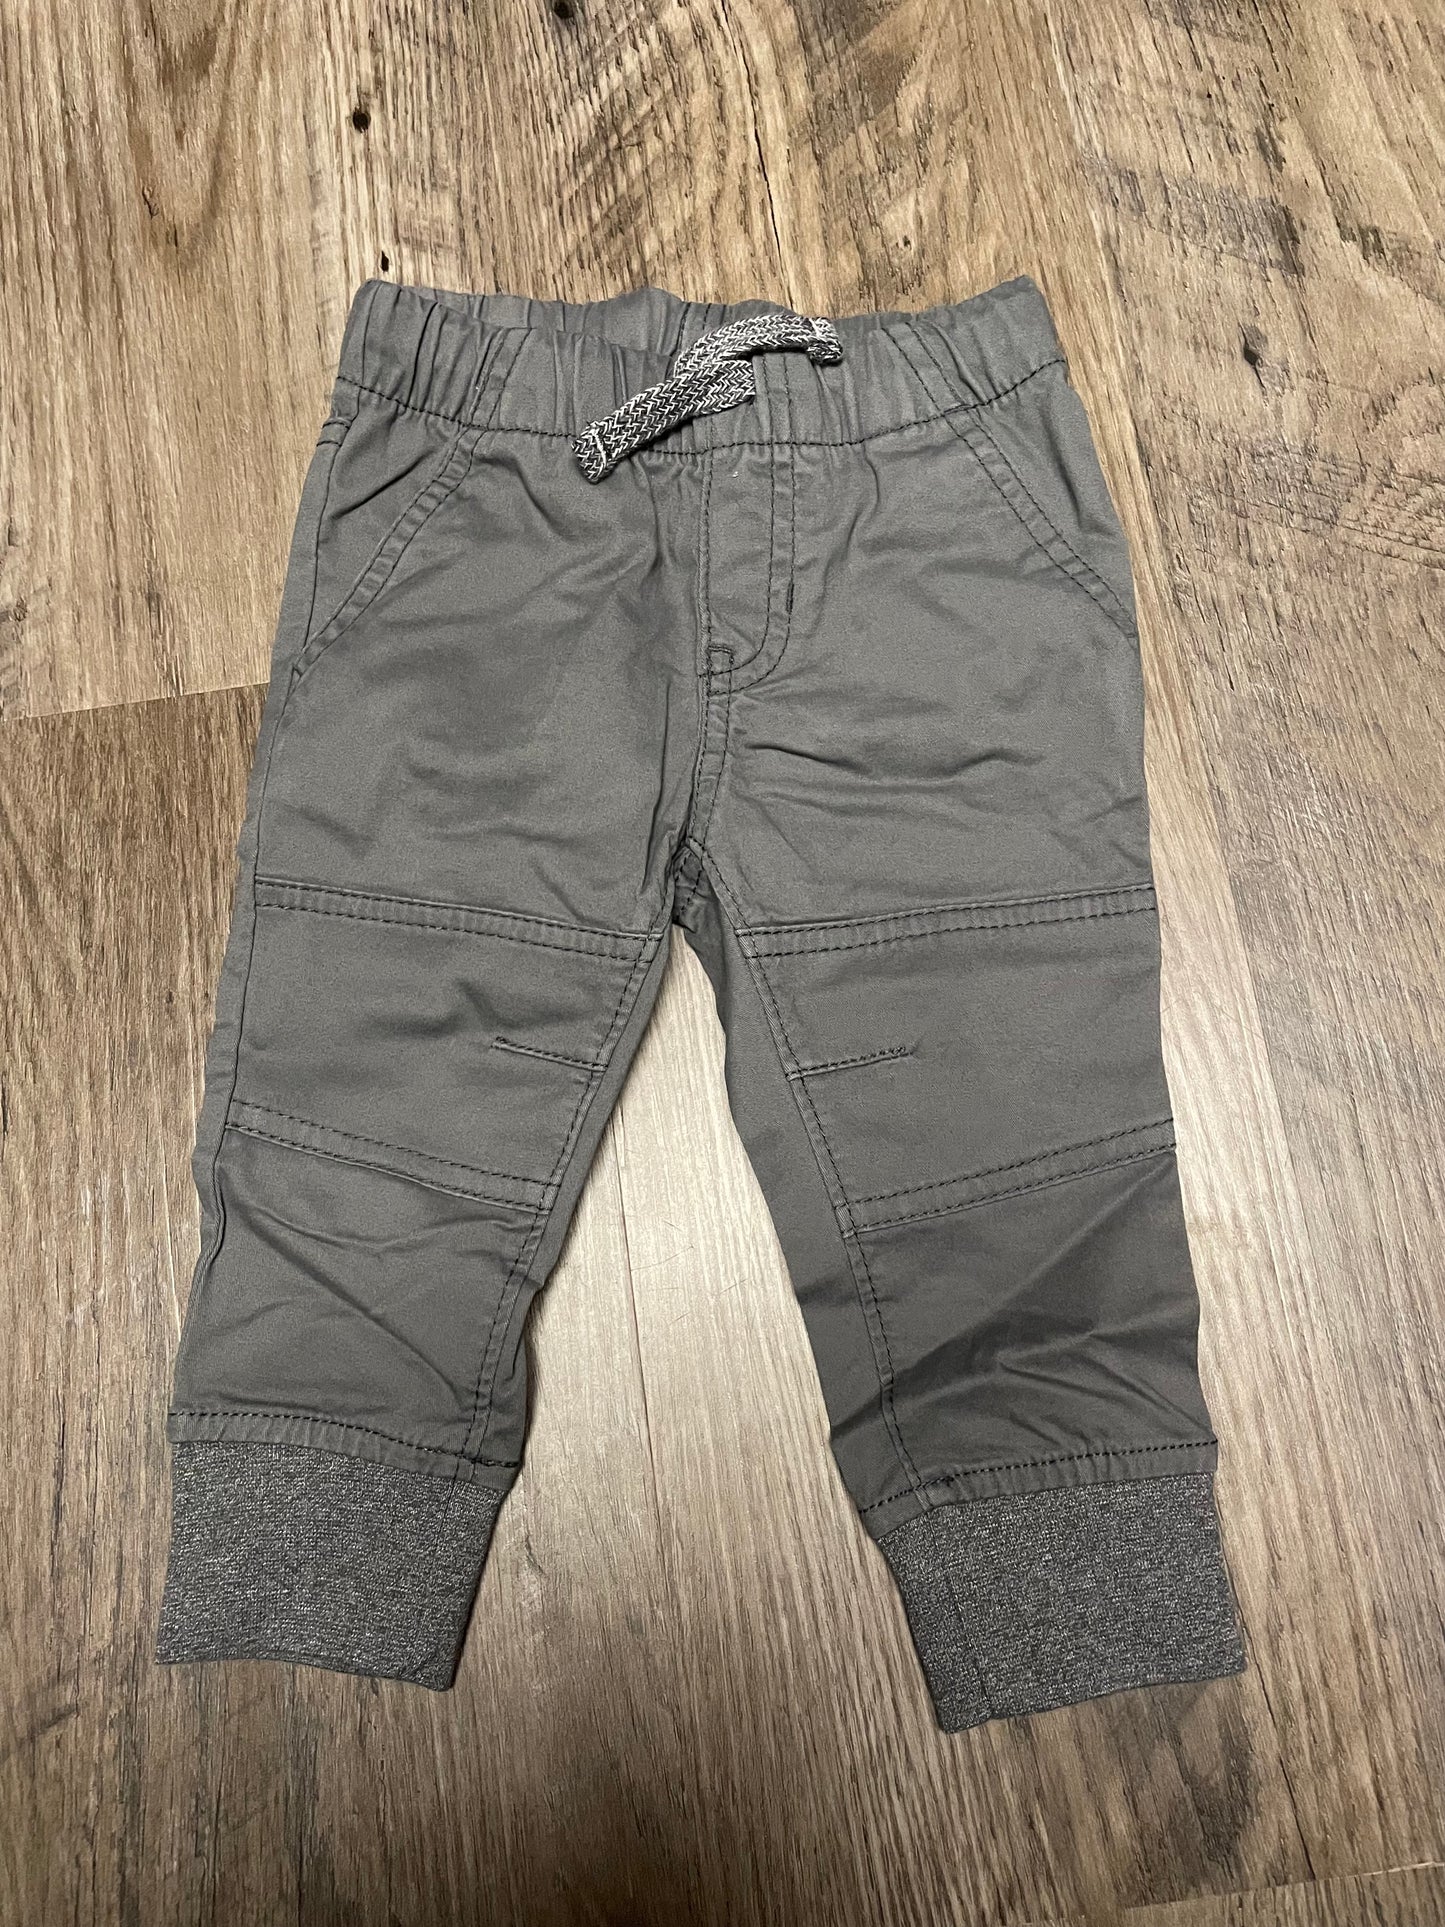 New baby 12 months boy cat and jack joggers pants